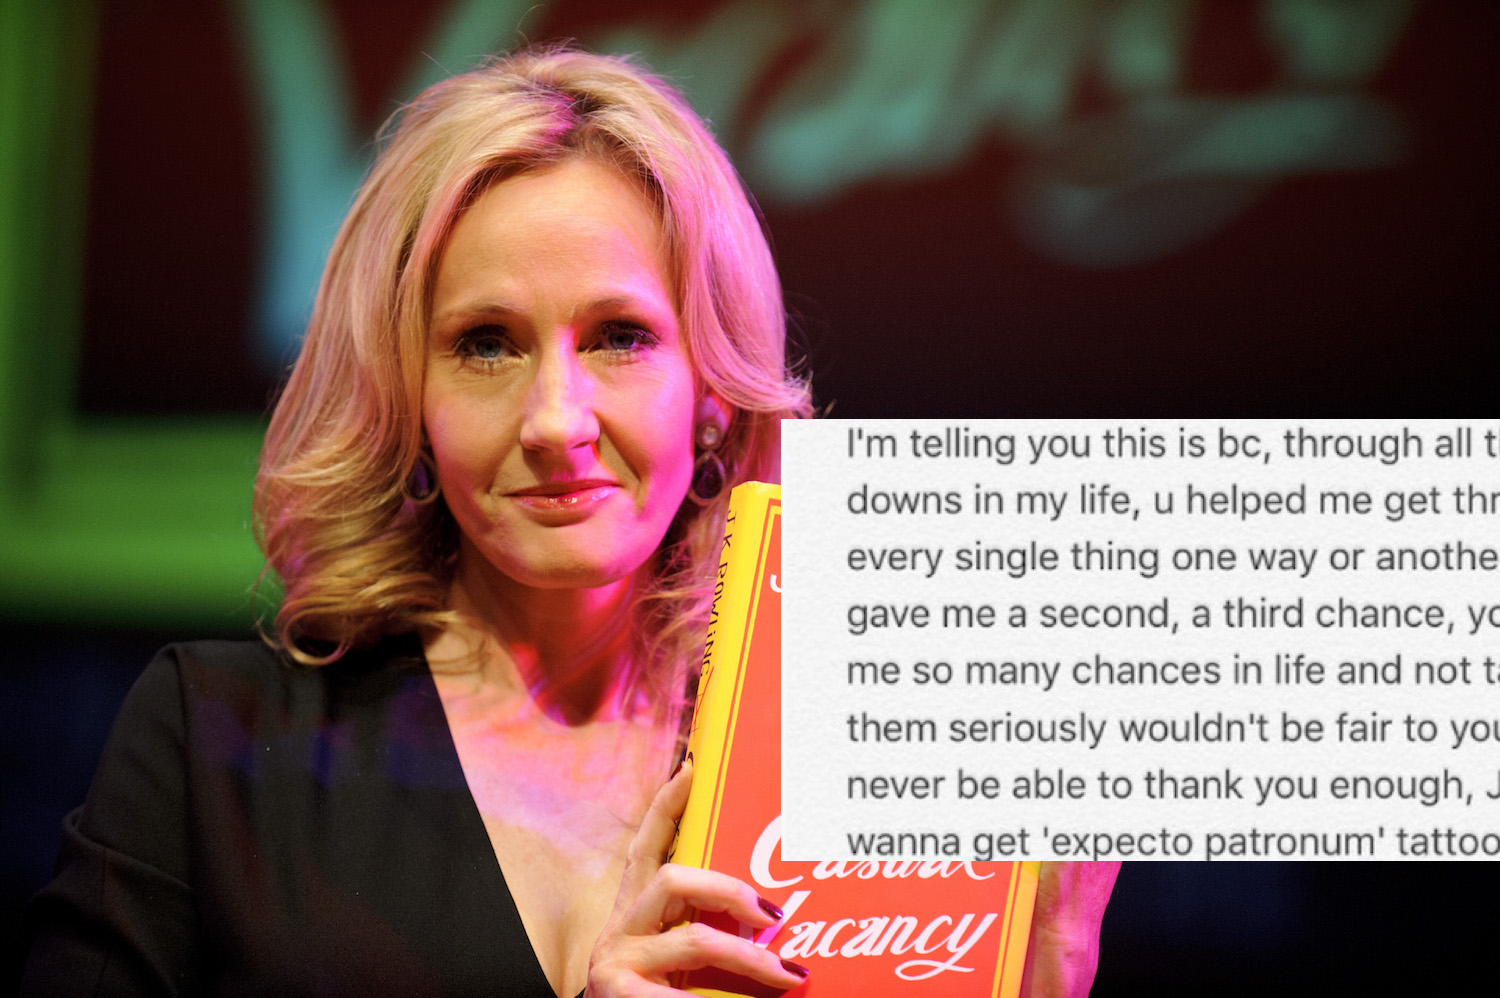 JK Rowling did something PERFECT for a fan who attempted suicide | PinkNews